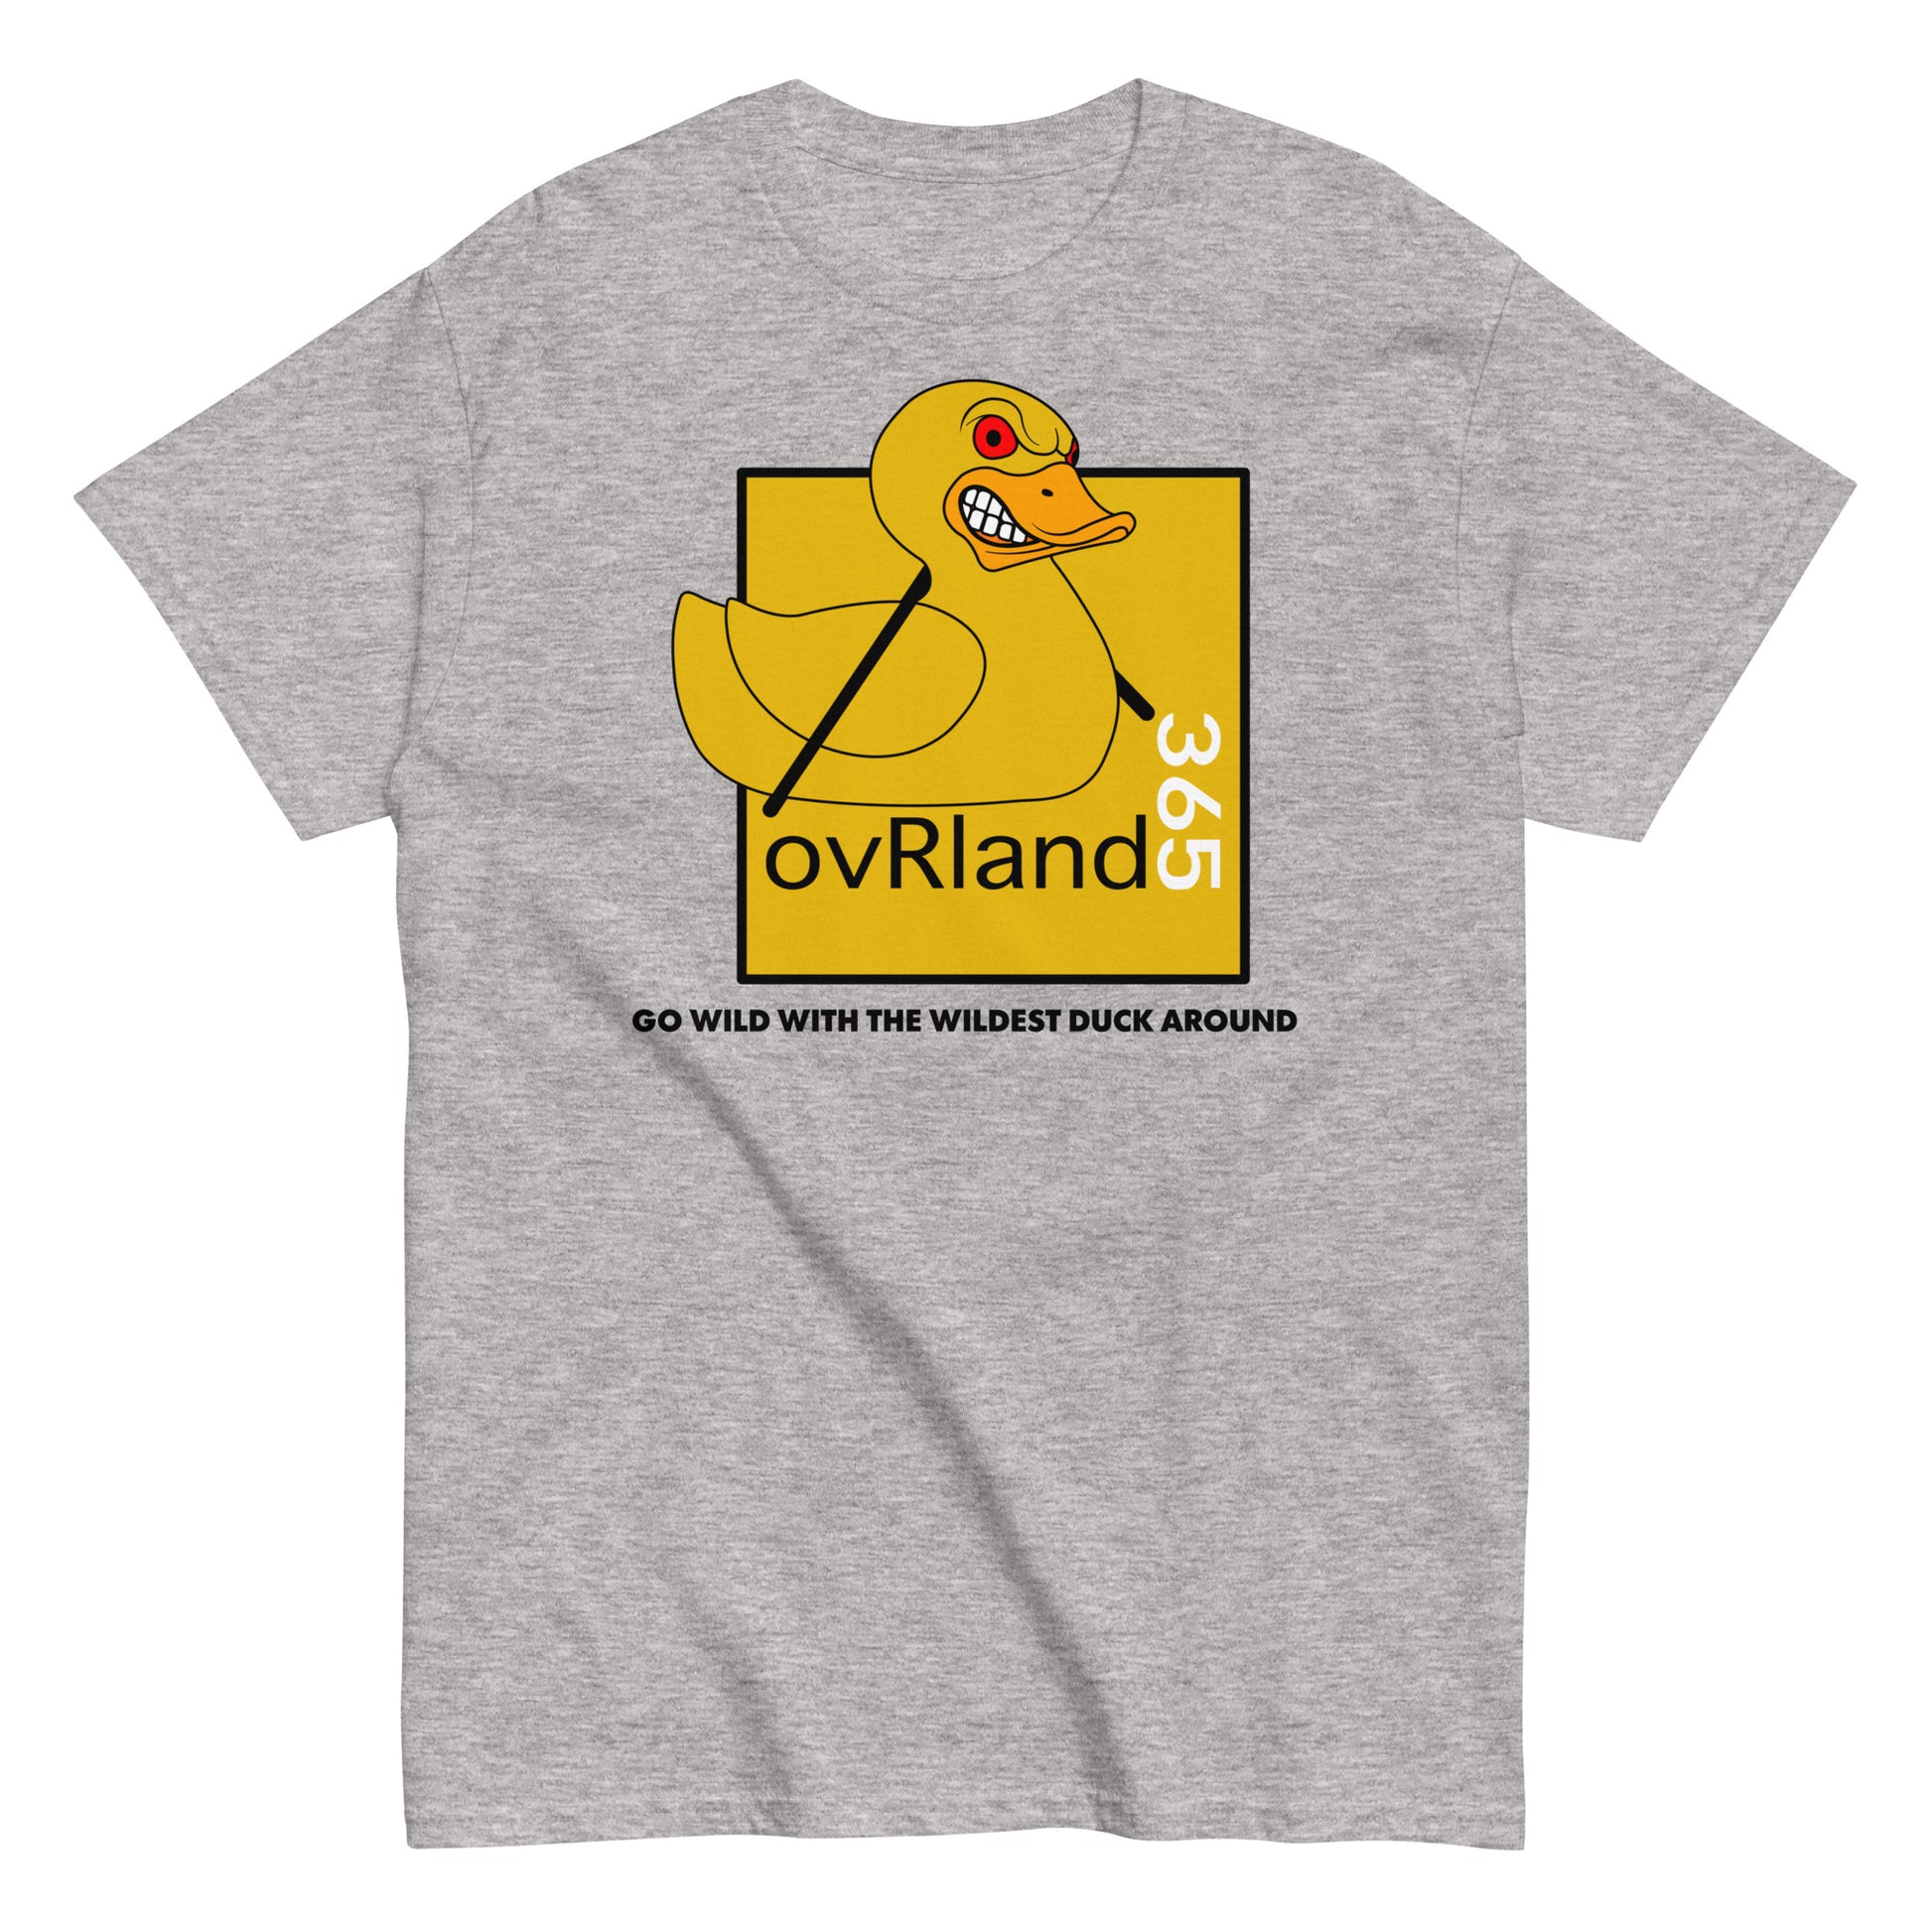 Go wild with the wildest duck around. ovRland365's Angry Duck. Jeep inspired. Grey t-shirt. overland365.com